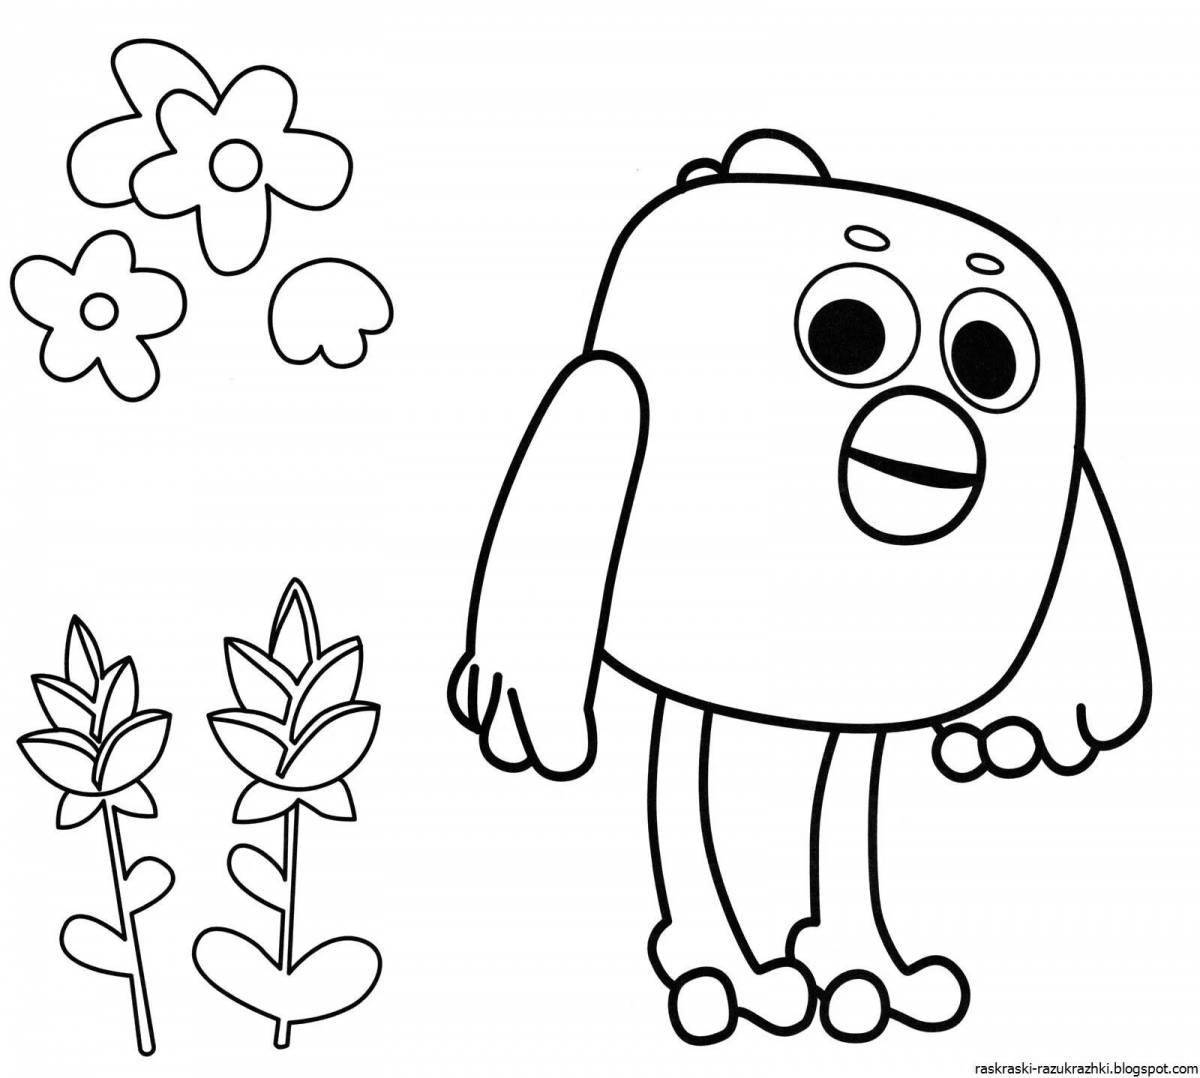 Adorable cute coloring pages for kids 4-5 years old